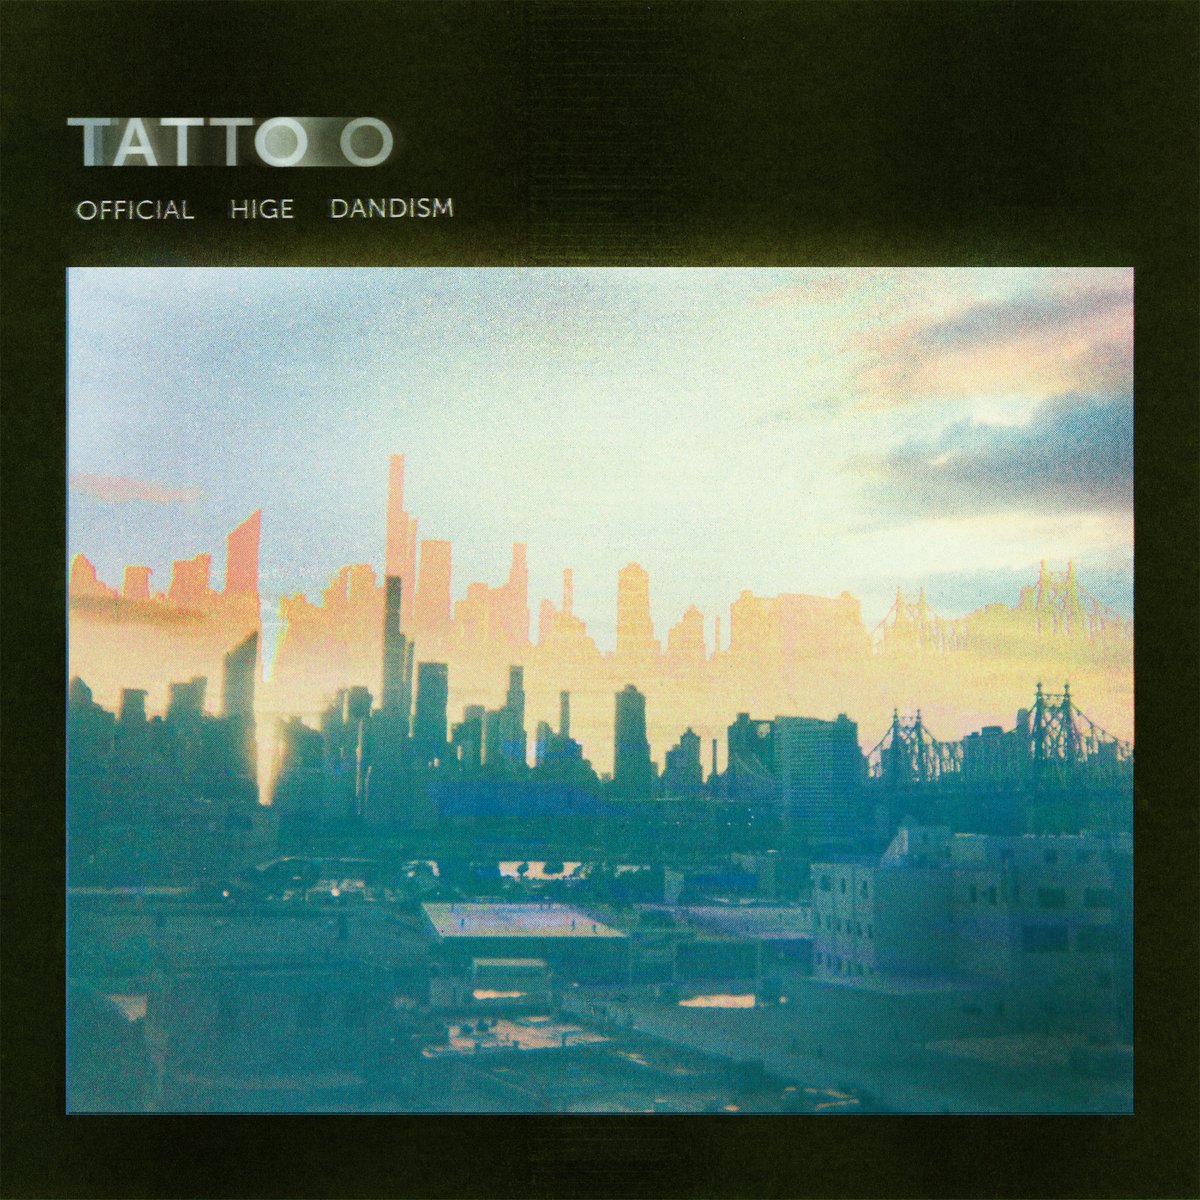 Cover art for『Official HIGE DANdism - TATTOO』from the release『TATTOO